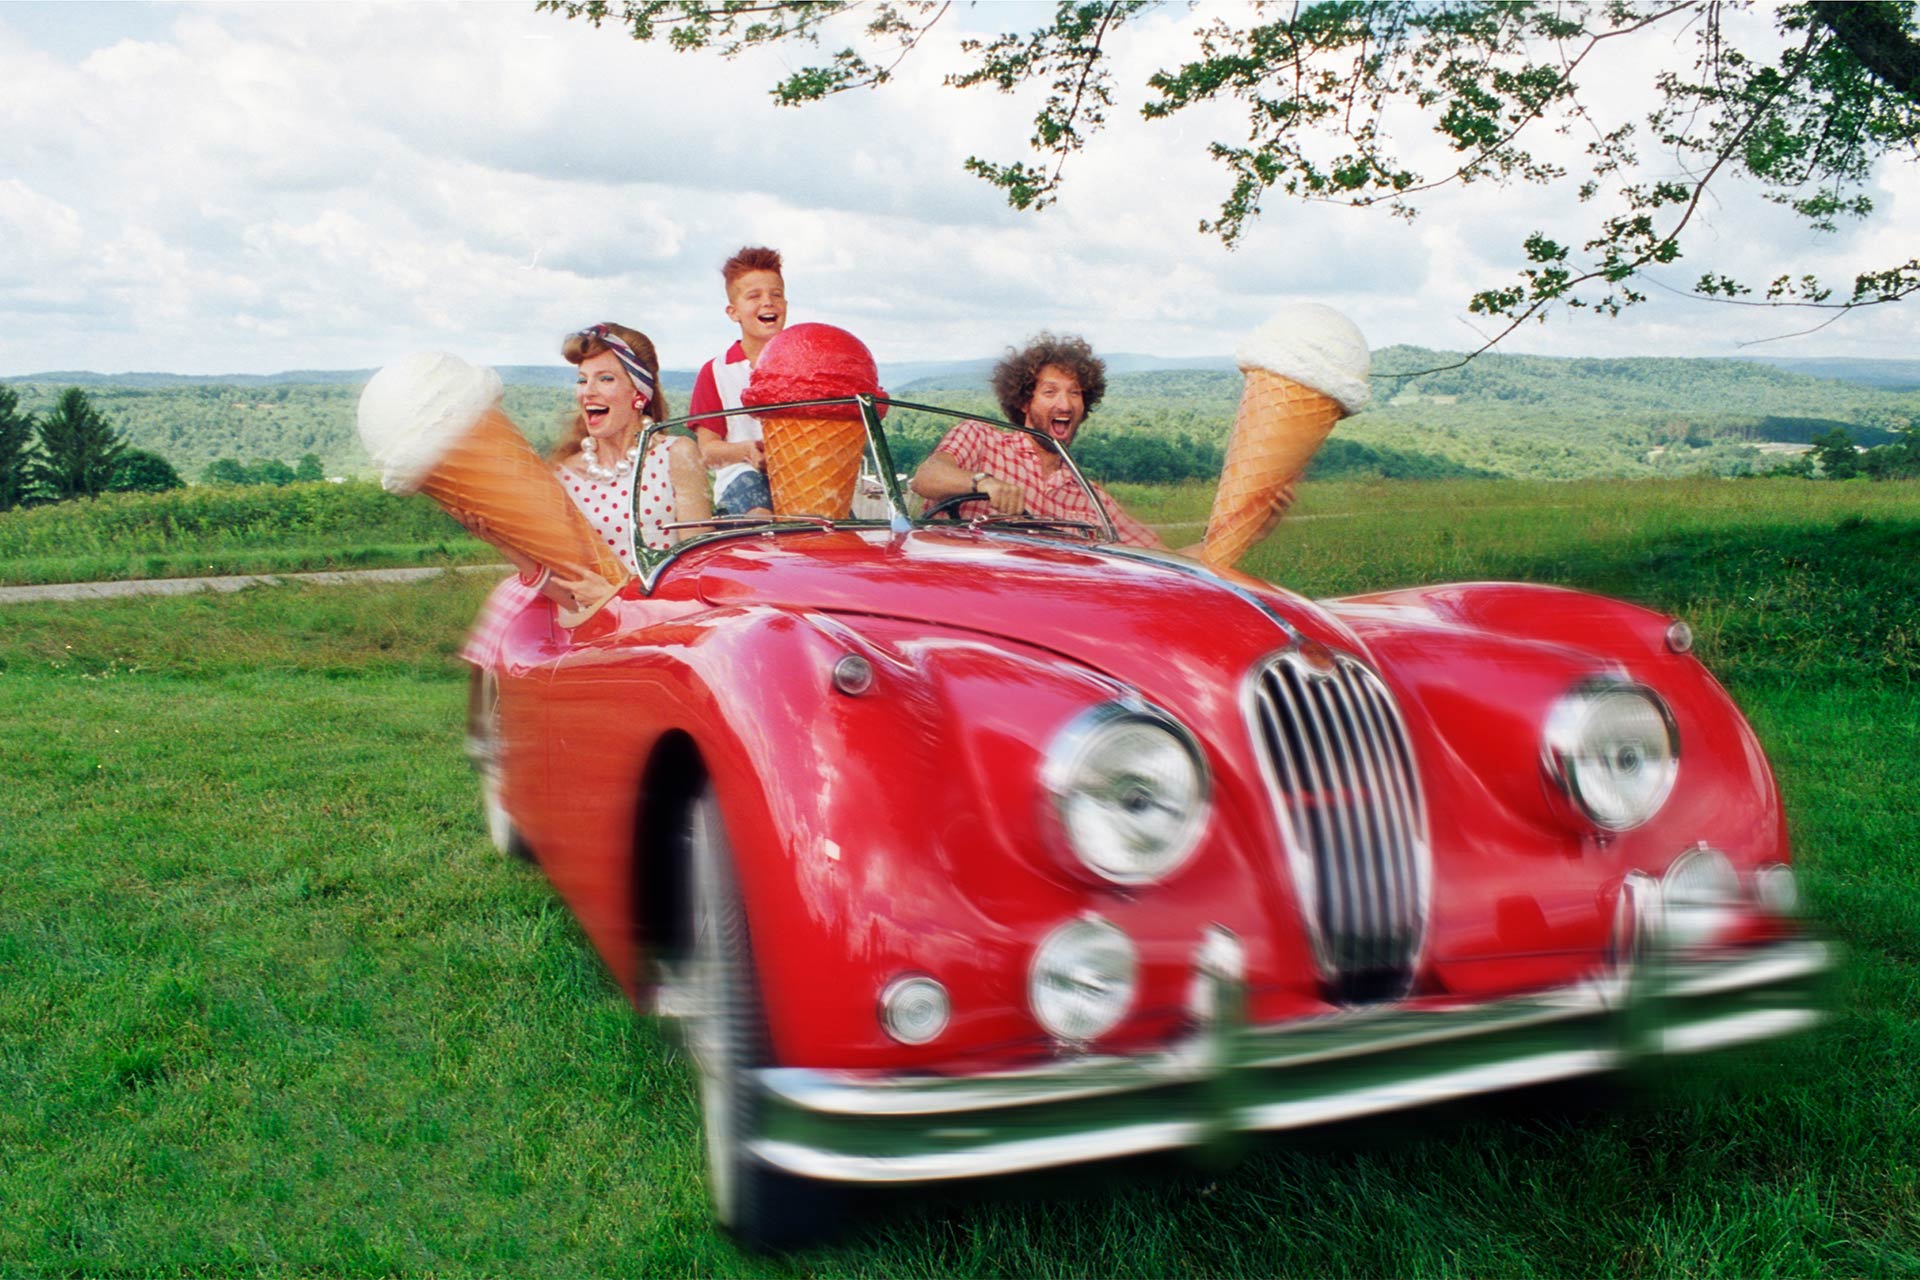 A family in a vintage red car in a field holding up giant ice cream cones